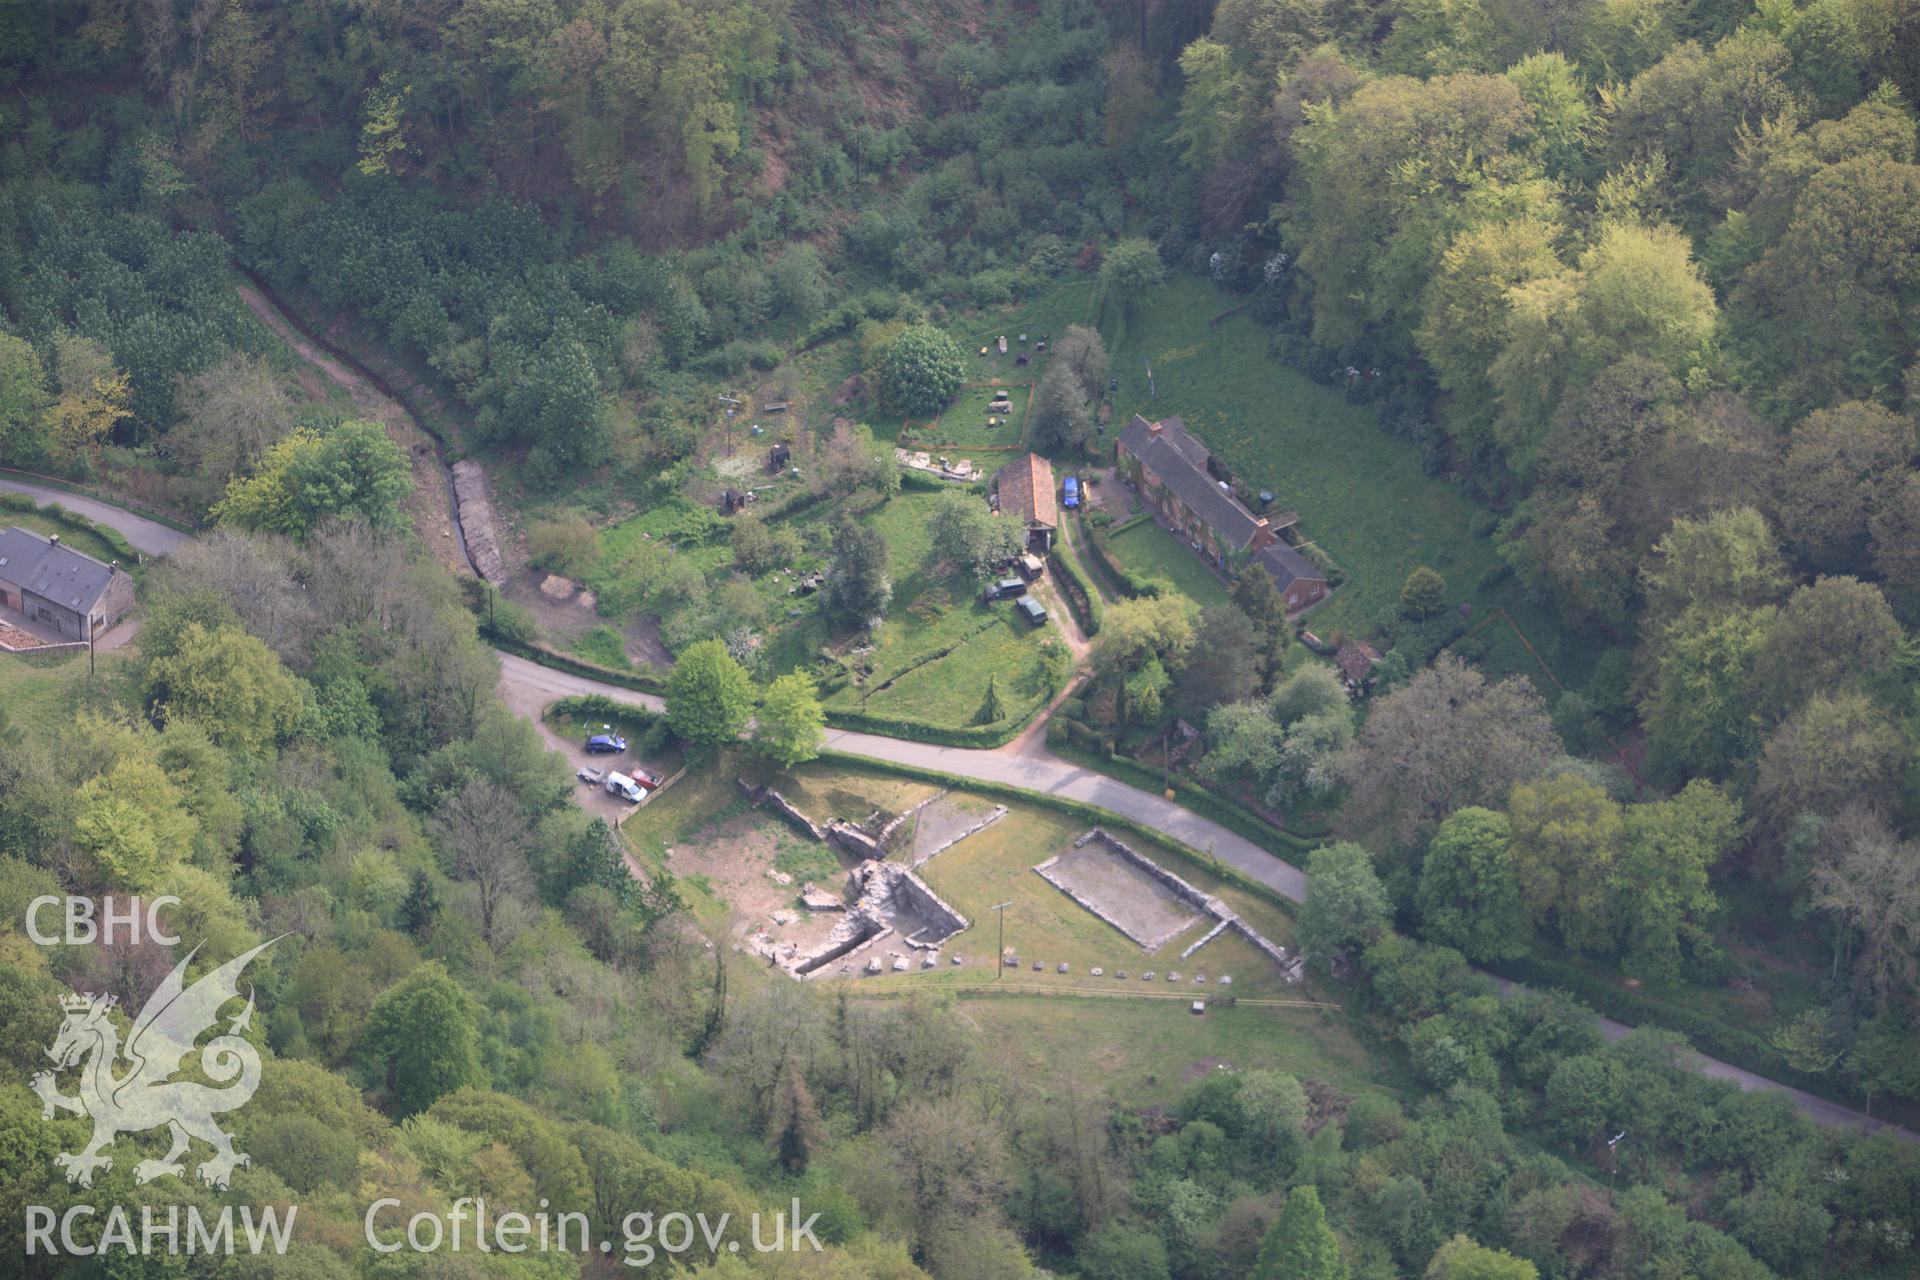 RCAHMW colour oblique photograph of Blast Furnace, Tintern. Taken by Toby Driver on 26/04/2011.